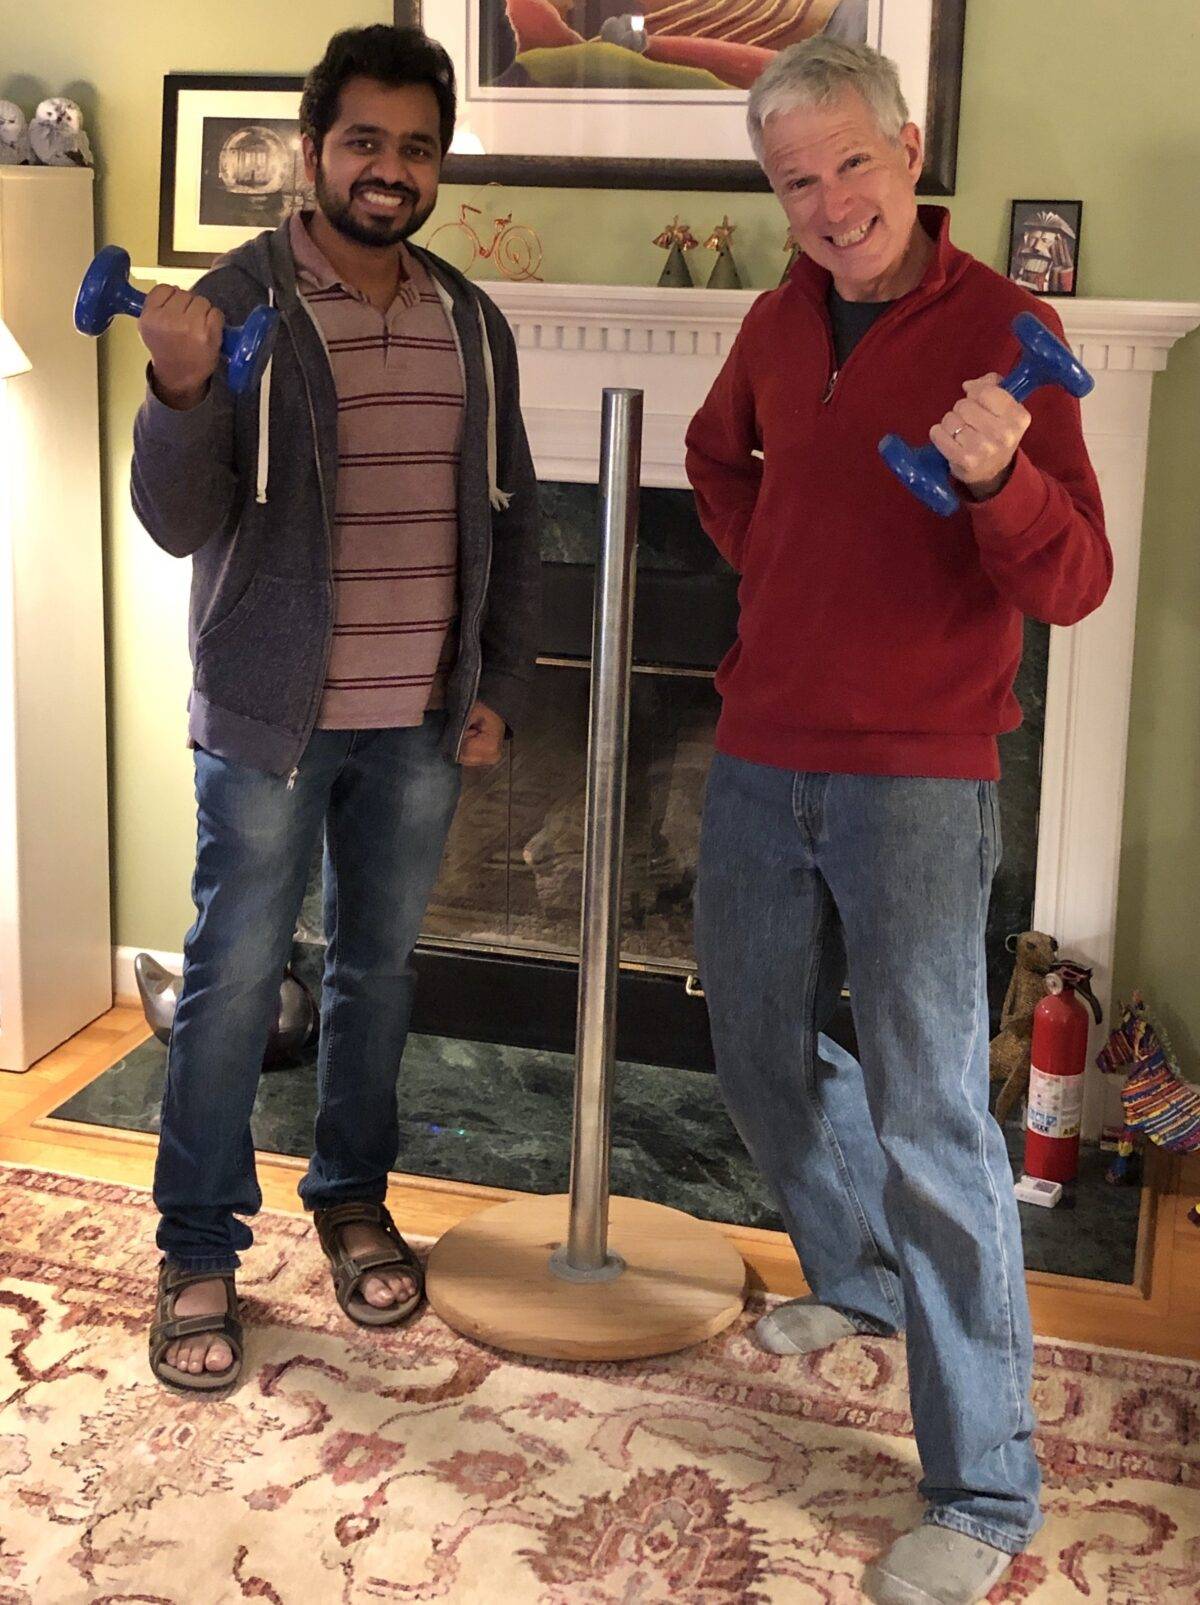 Two people practicing feats of strength next to a Festivus pole